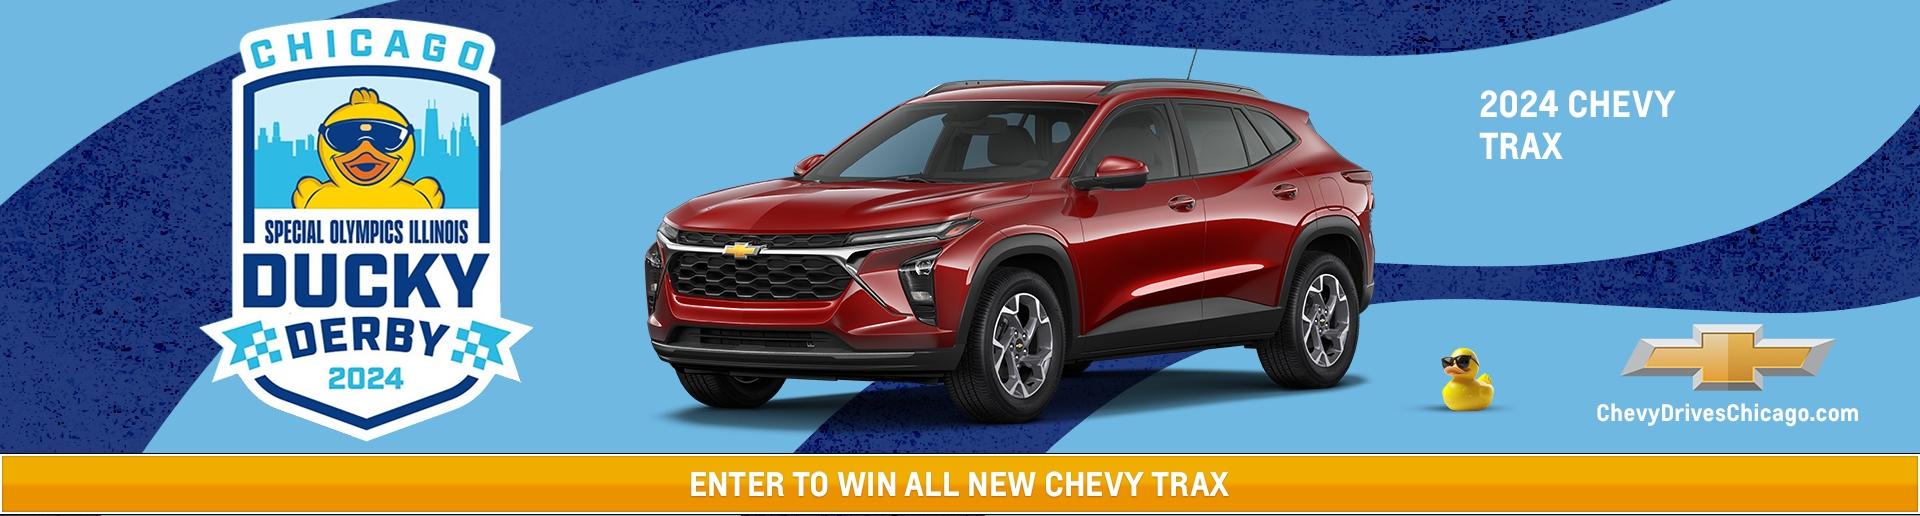 Enter to win a 2024 Chevy Trax from your local Chicagoland or northwest Indiana Chevrolet dealer and support the IL Special Olympics via the Chicago Ducky Derby.